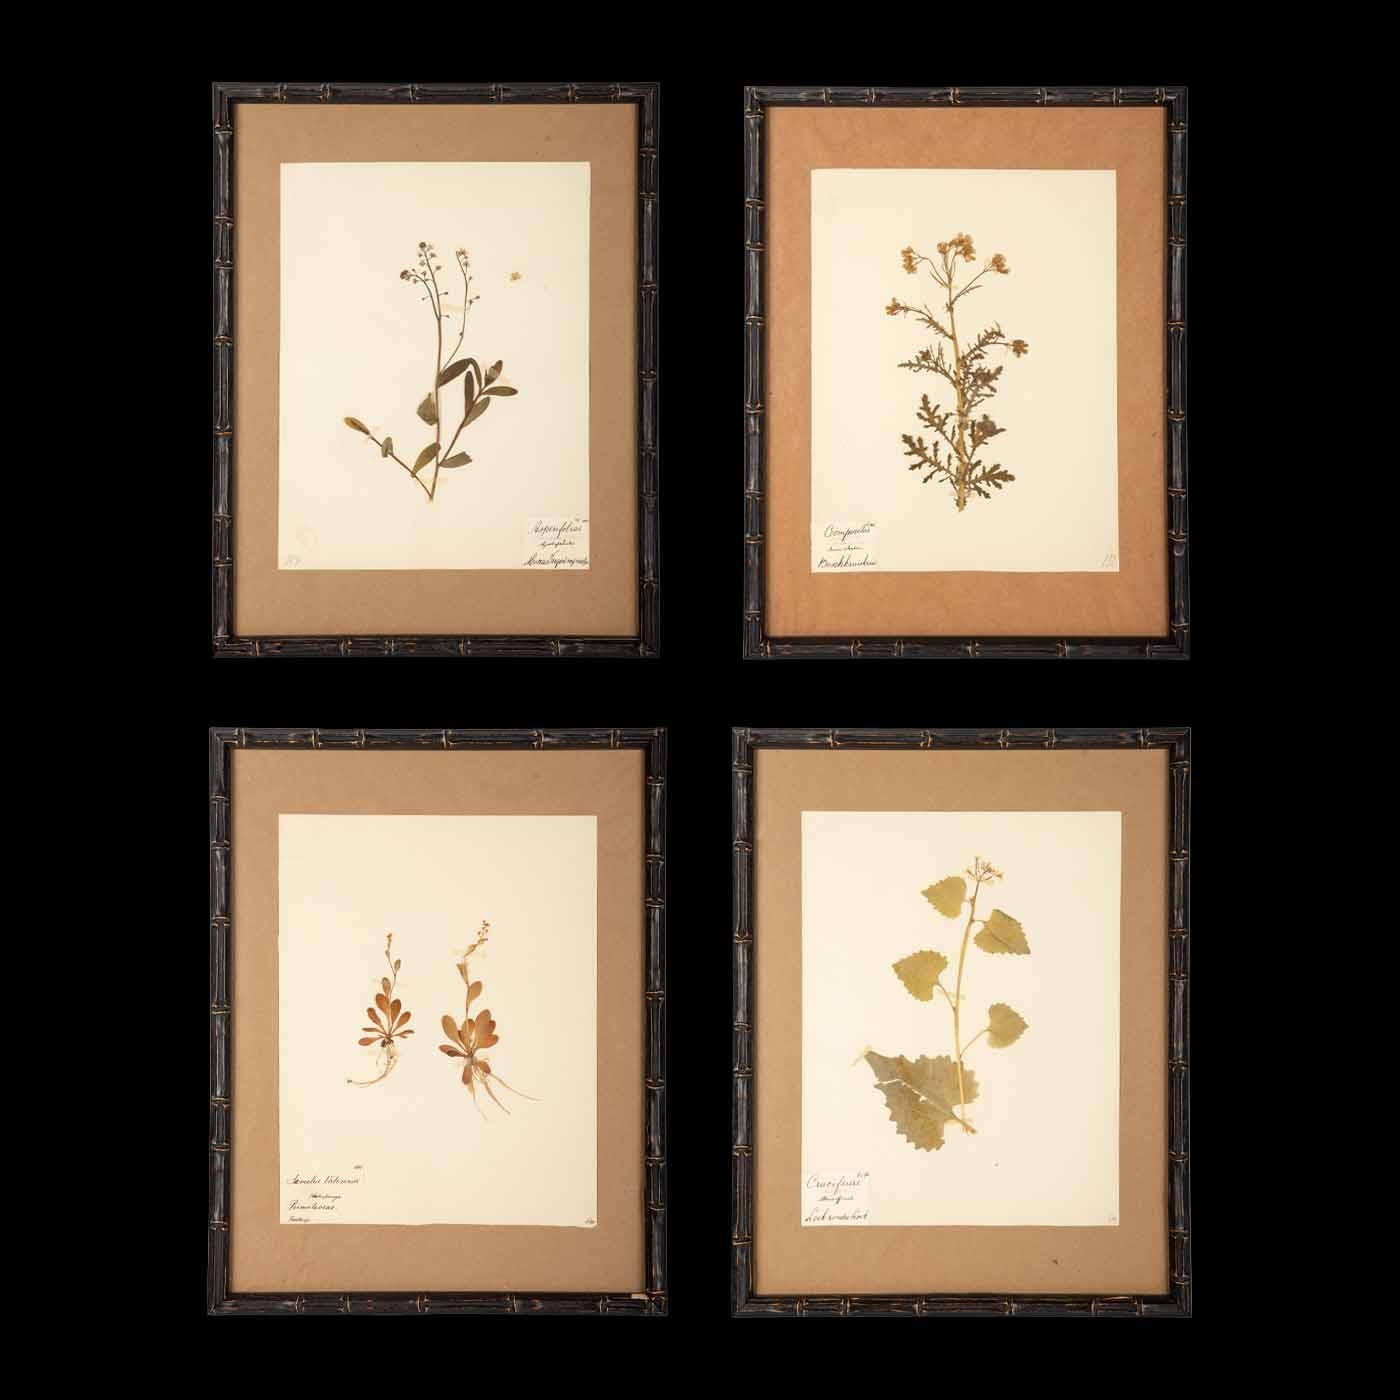 Four framed and pressed plants from a collection of botanical pressings purchased in France. In the late 19th century collecting and pressing plants was all the rage for affluent Europeans. These collectors spent hours drying, pressing and mounting